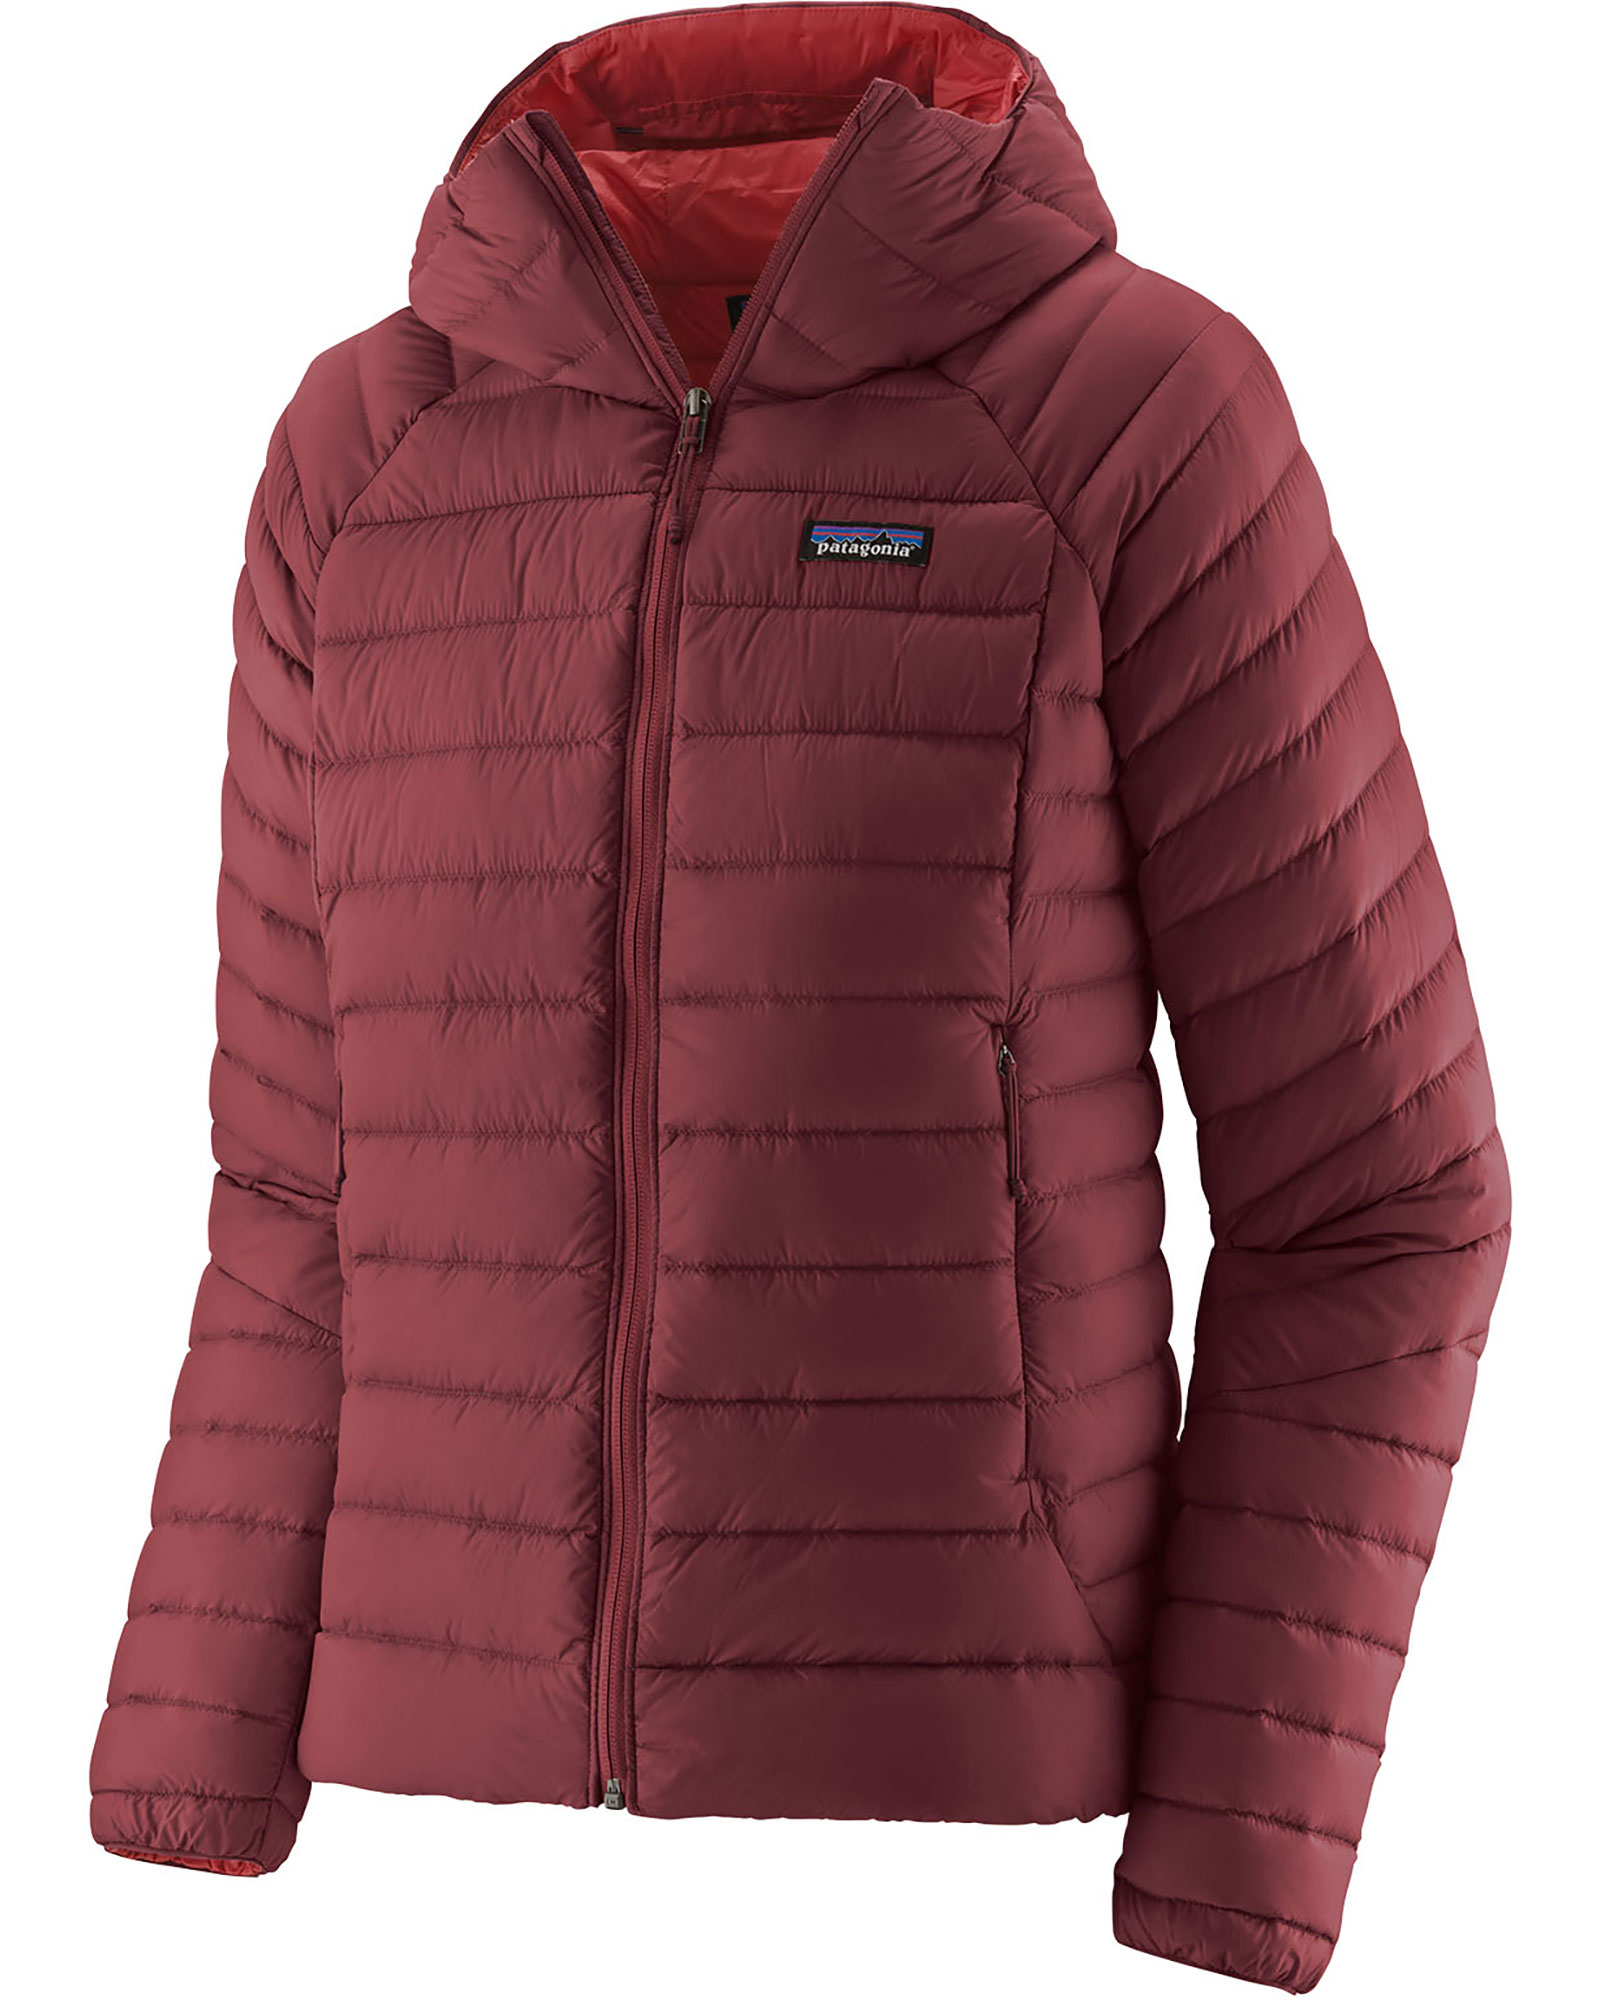 Patagonia Women’s Down Sweater Hoodie - Sequoia Red S